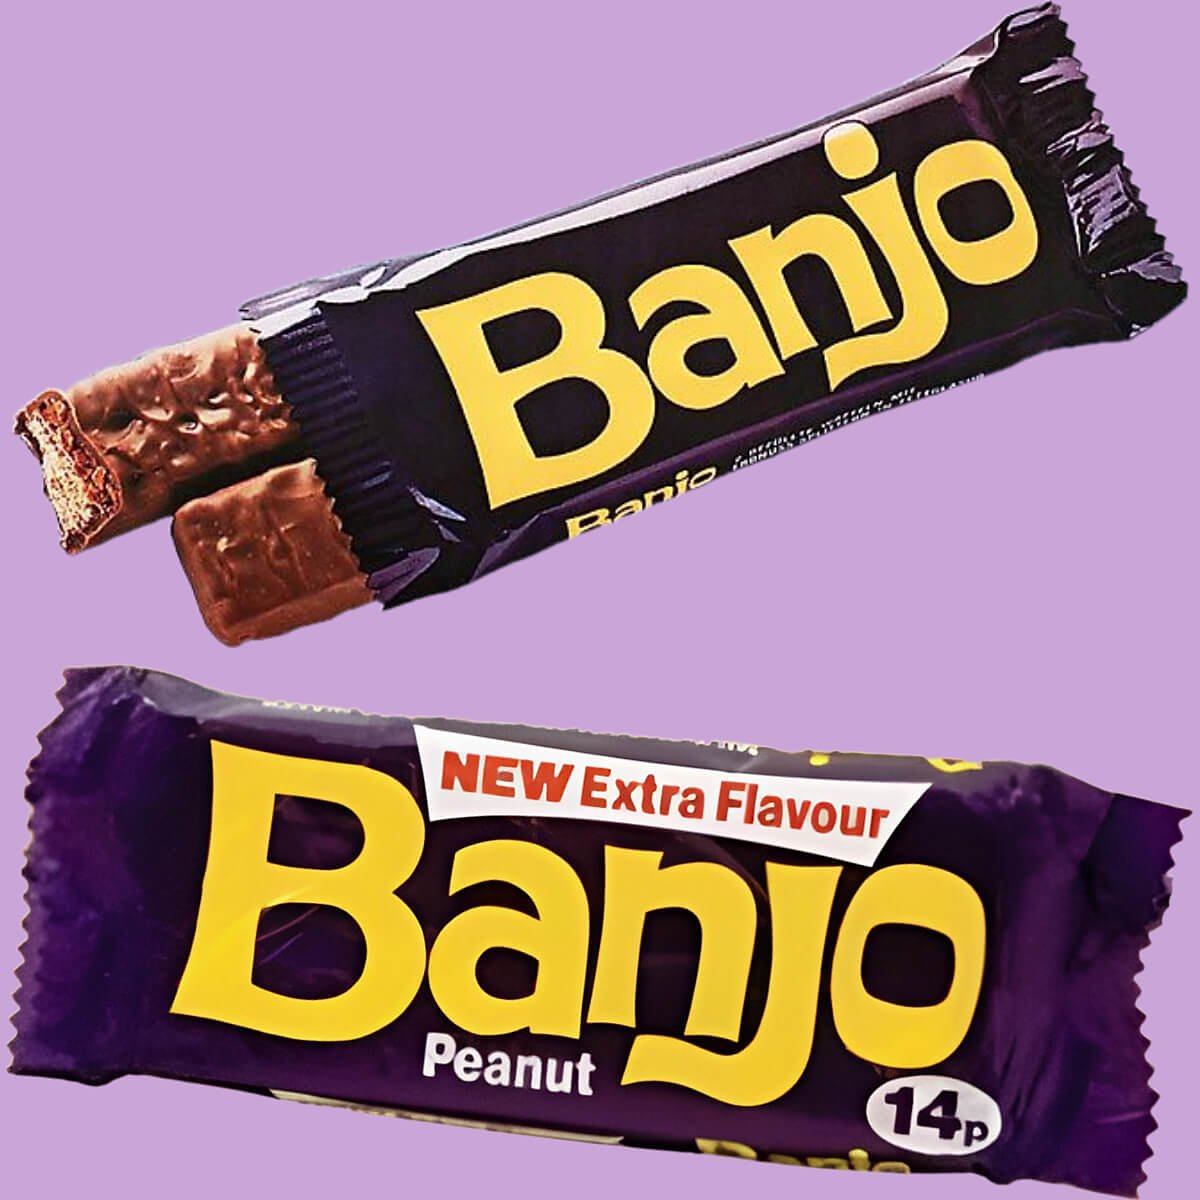 Two Banjo chocolate bars, peanut flavour in purple wrappers with yellow logo text.